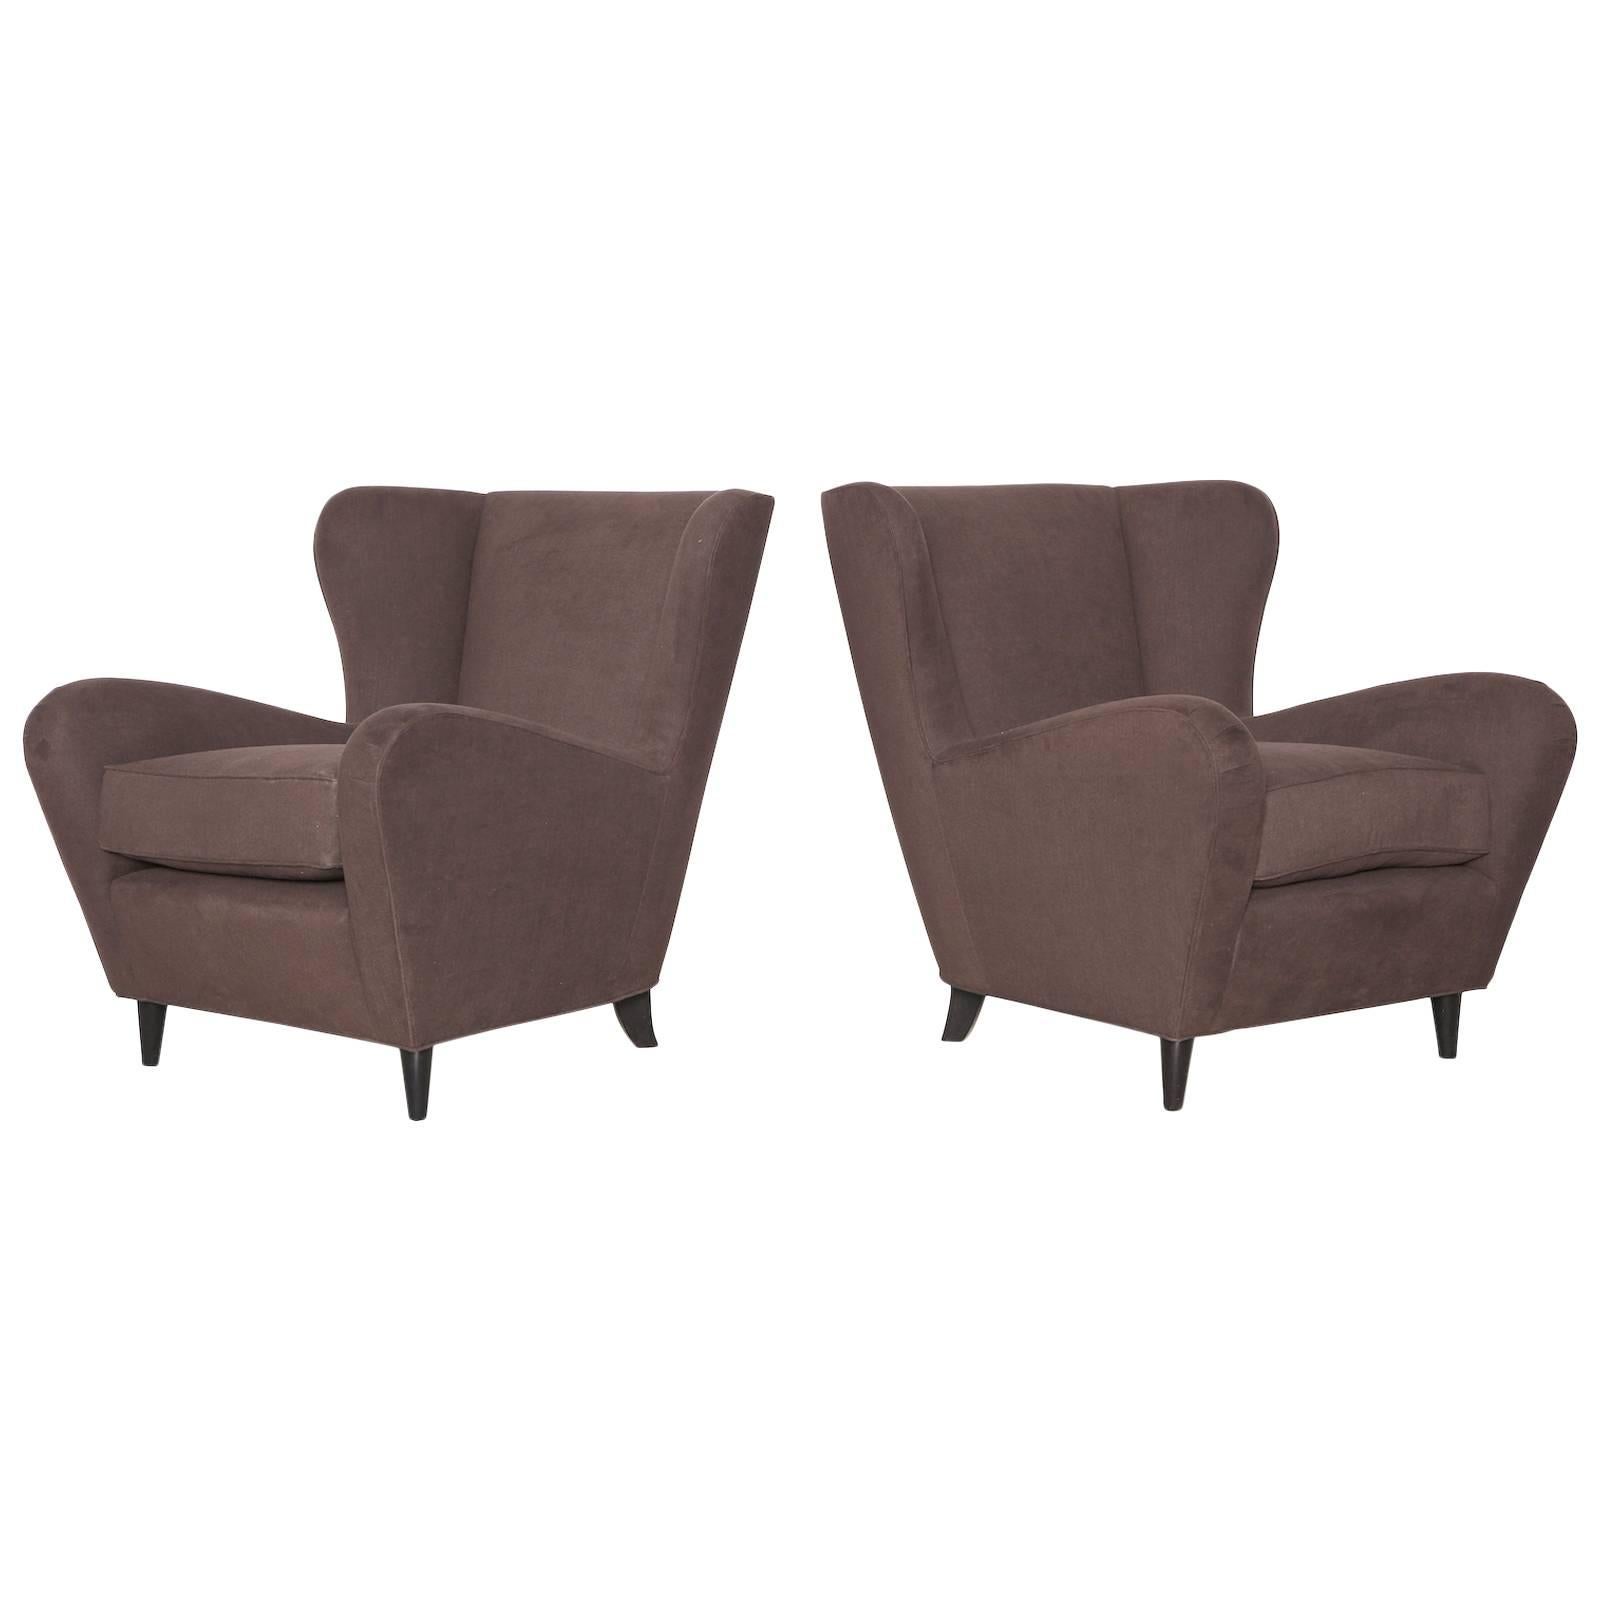 Pair of Low Lounge Chairs